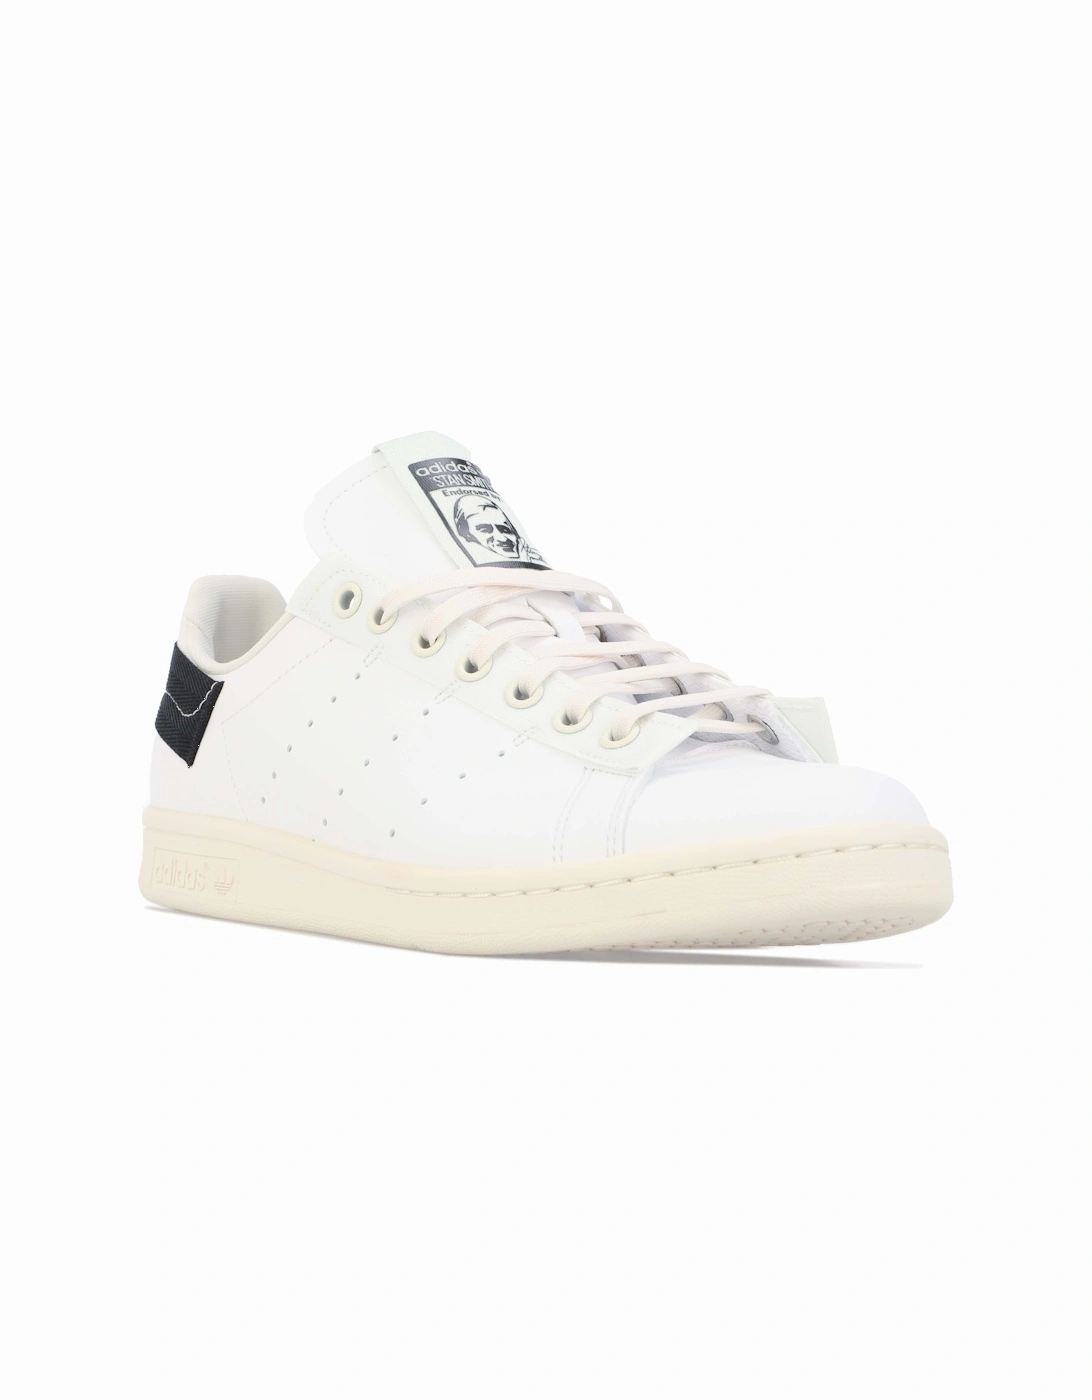 Men's Mens Stan Smith Parley Trainers - White - Size: 3.5